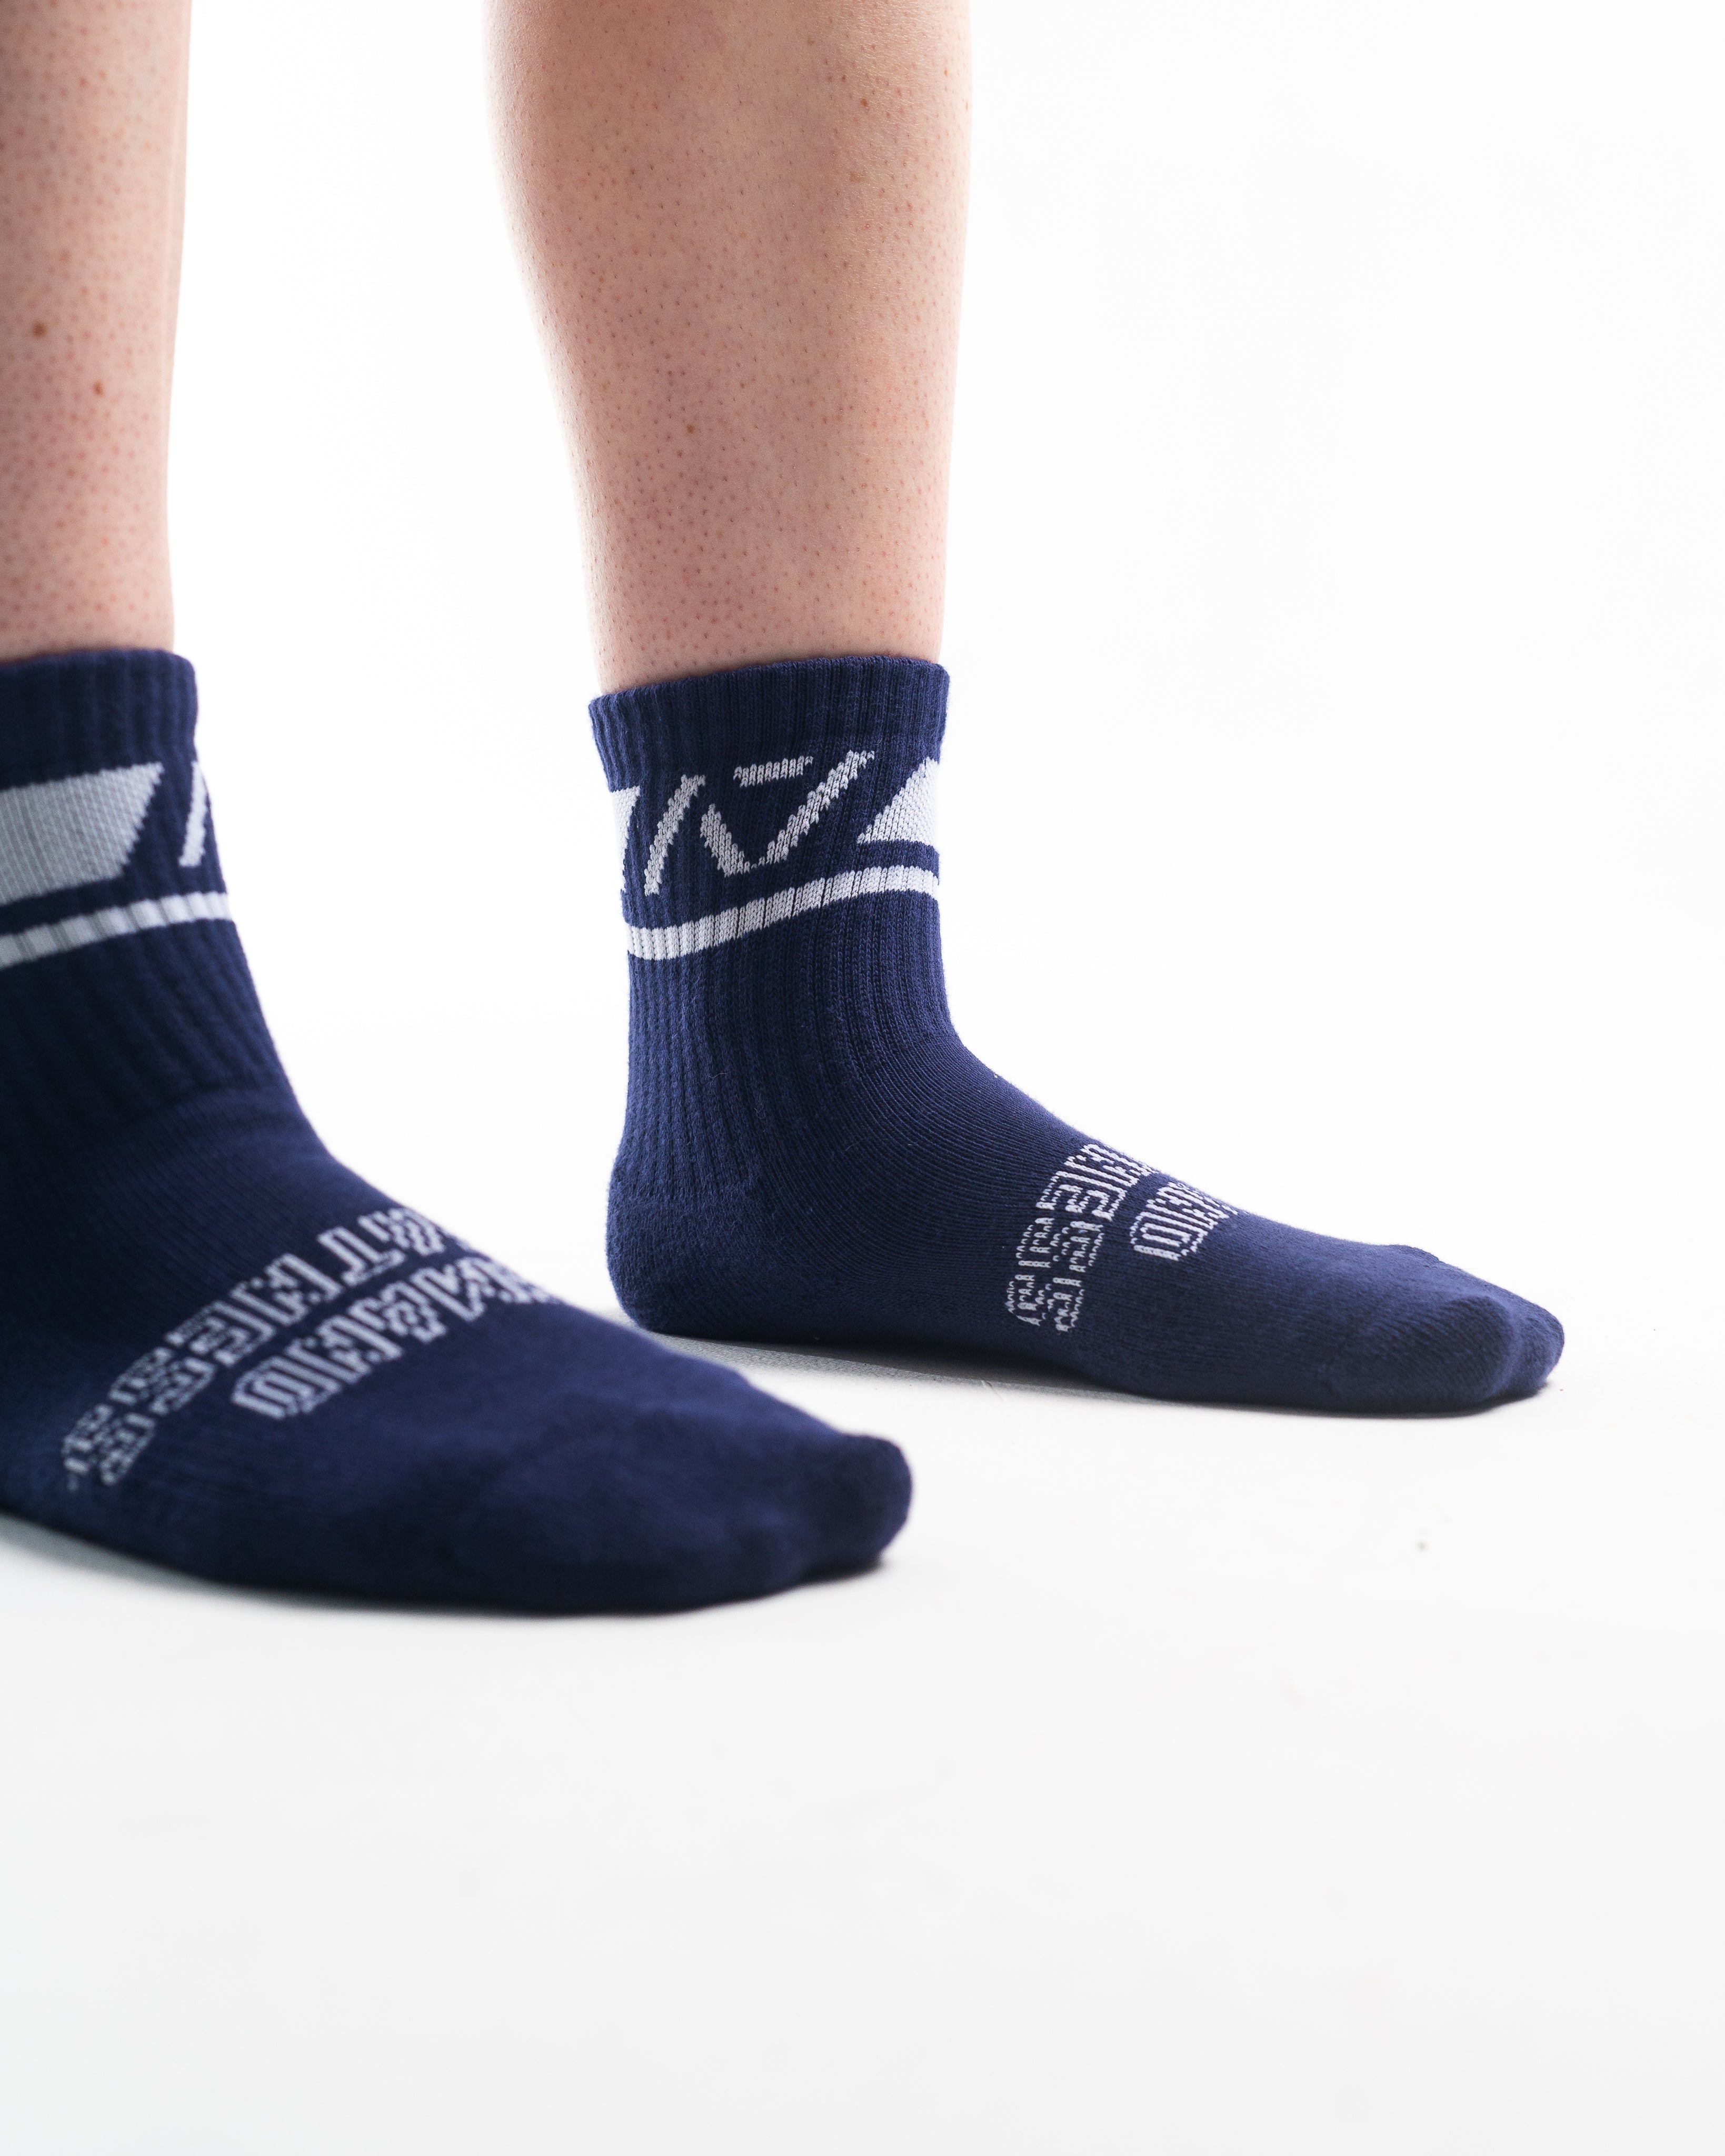 A7 Night Light Crew socks showcase white and blue logos and let your energy show on the platform, in your training or while out and about. The IPF Approved Night Light Meet Kit includes Powerlifting Singlet, A7 Meet Shirt, A7 Zebra Wrist Wraps, A7 Deadlift Socks, Hourglass Knee Sleeves (Stiff Knee Sleeves and Rigor Mortis Knee Sleeves). All A7 Powerlifting Equipment shipping to UK, Norway, Switzerland 